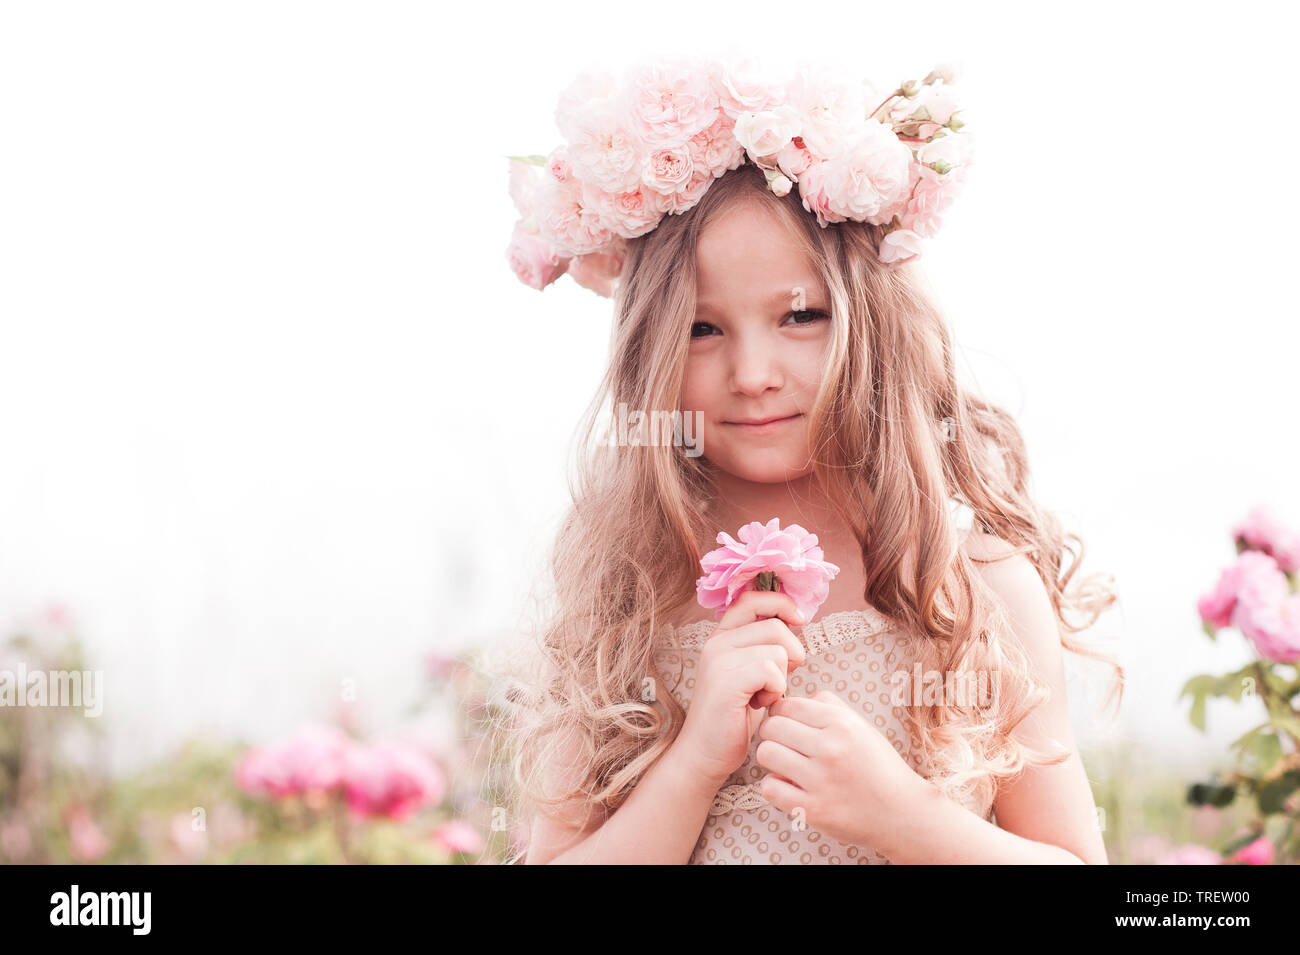 A Cute 8 Year Old Girl in Pink Stock Image - Image of female, little:  20234667